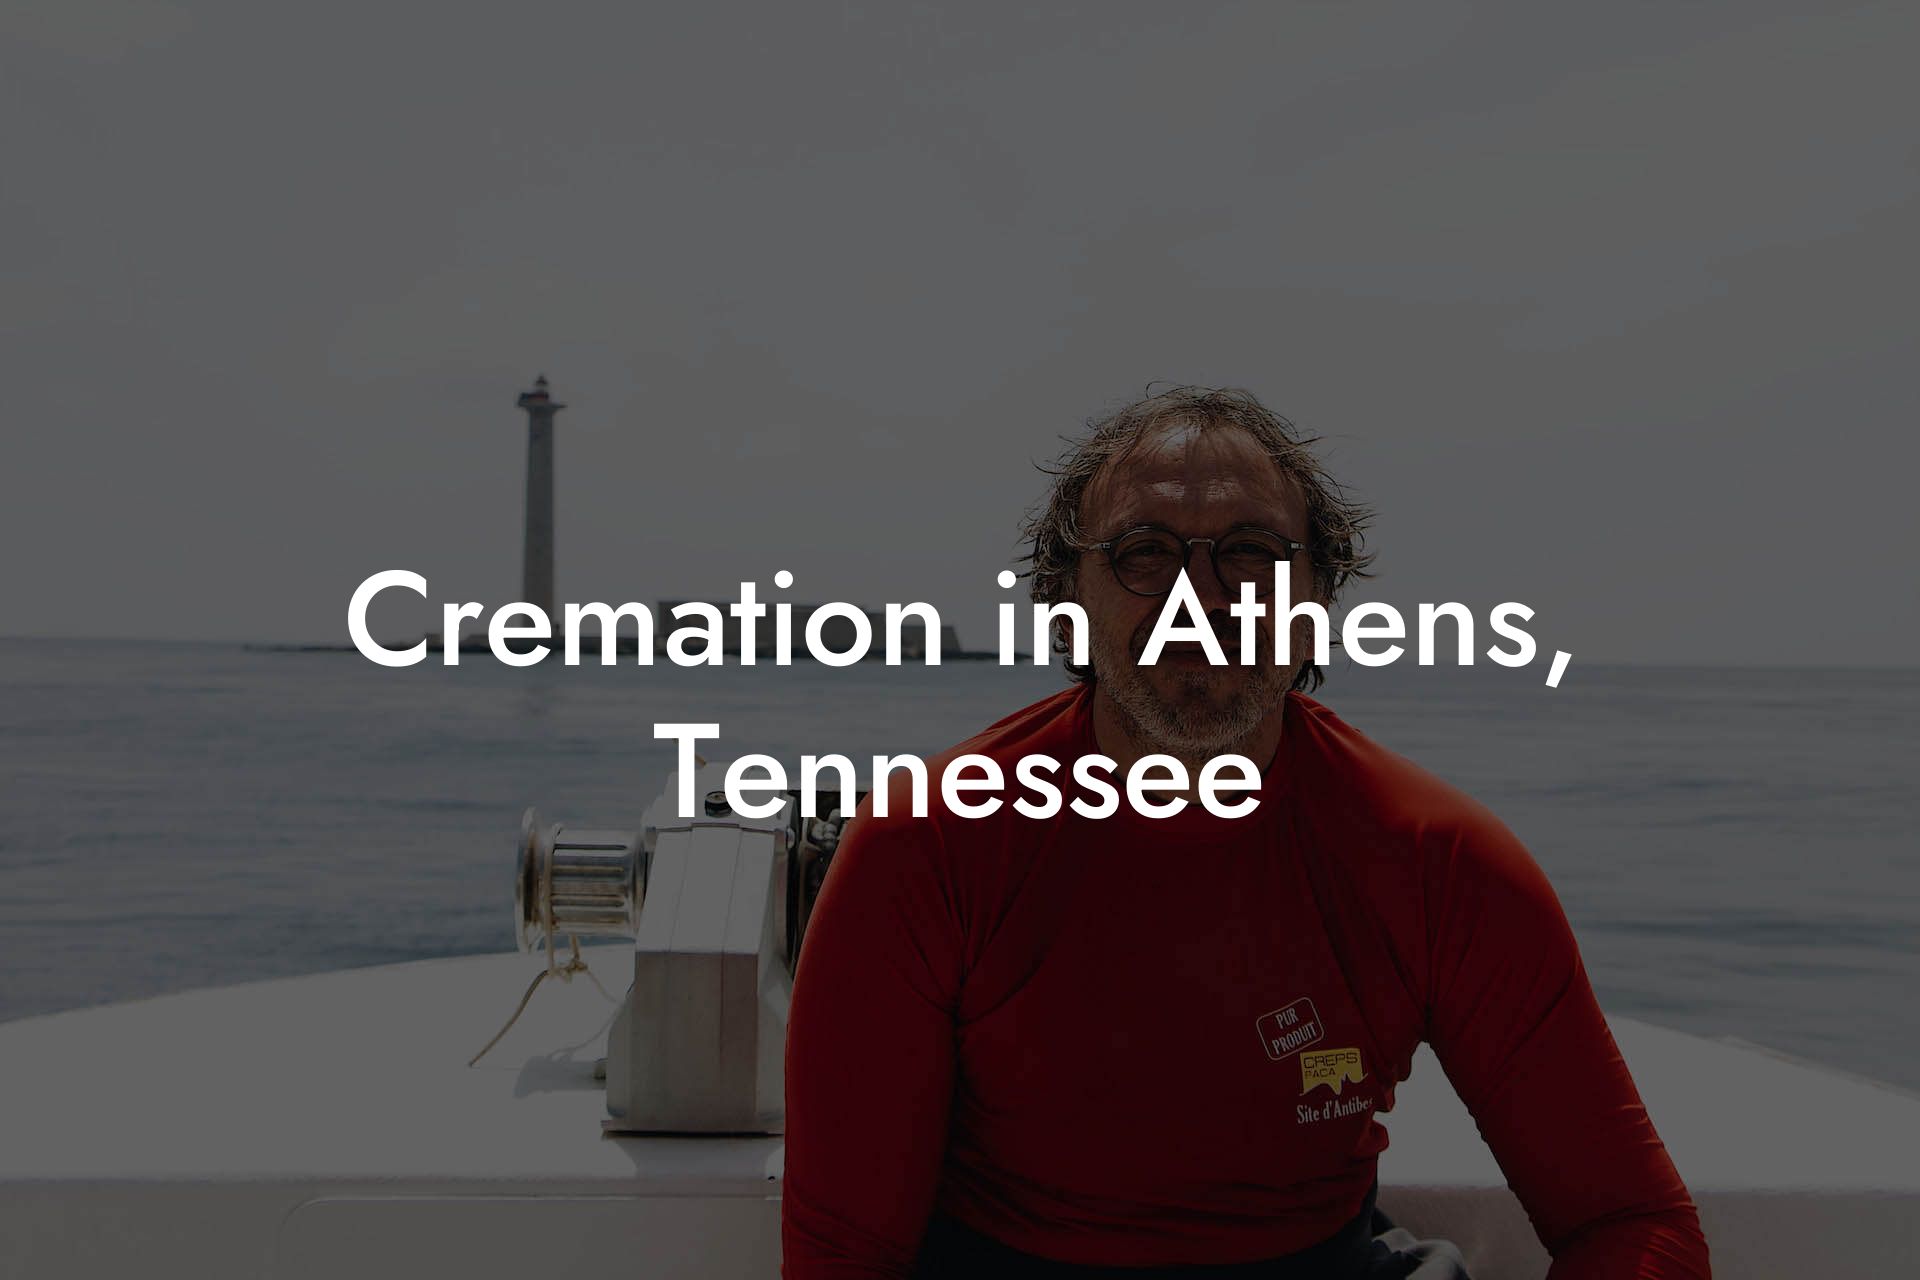 Cremation in Athens, Tennessee